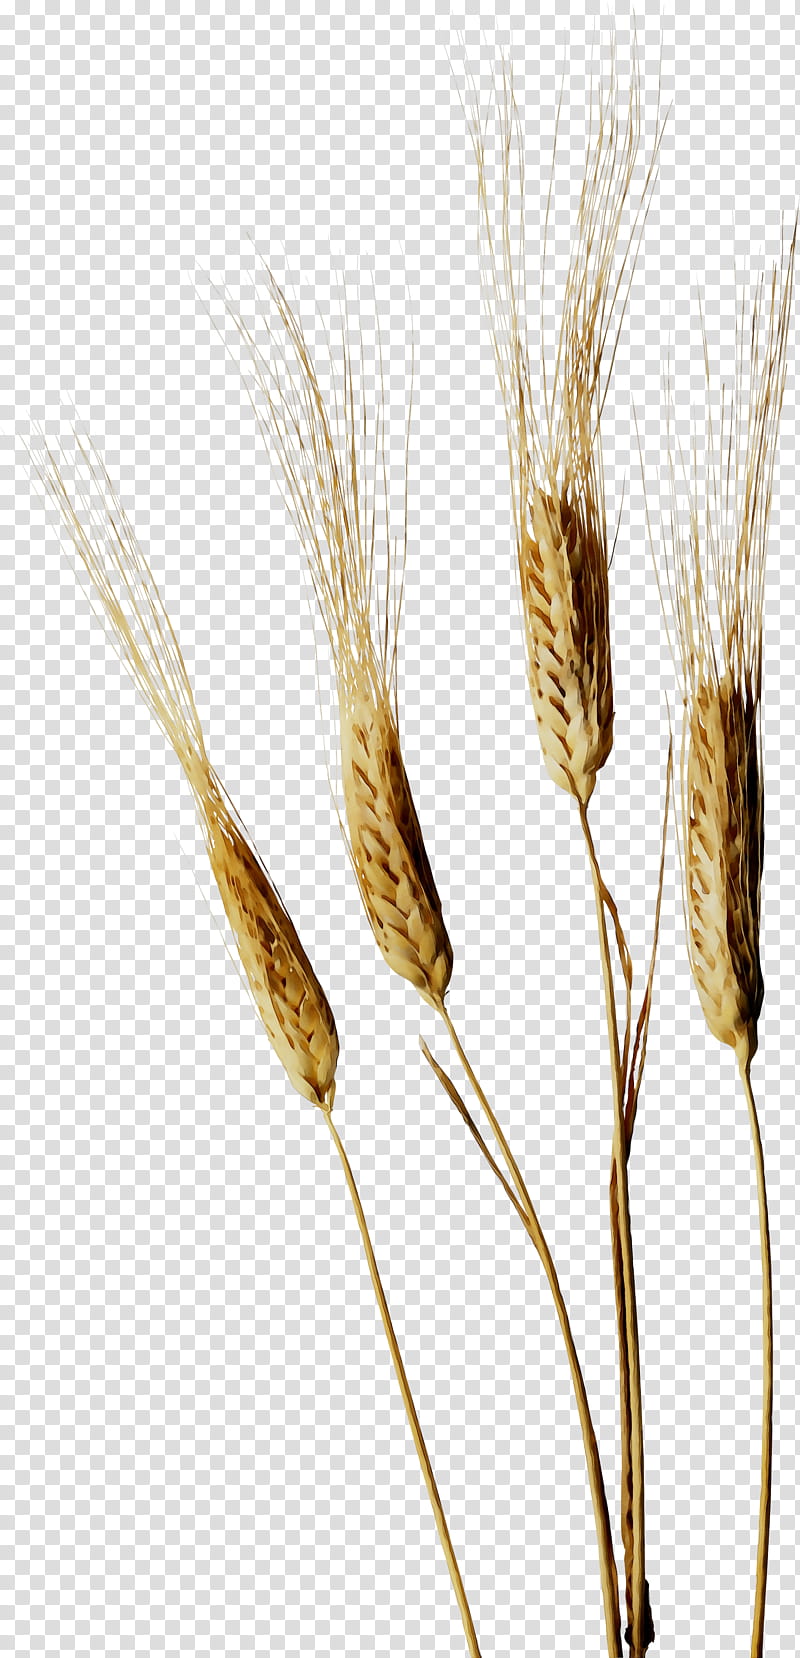 Wheat, Emmer, Einkorn Wheat, Cereal, Grain, Caryopsis, Spelt, Barley transparent background PNG clipart